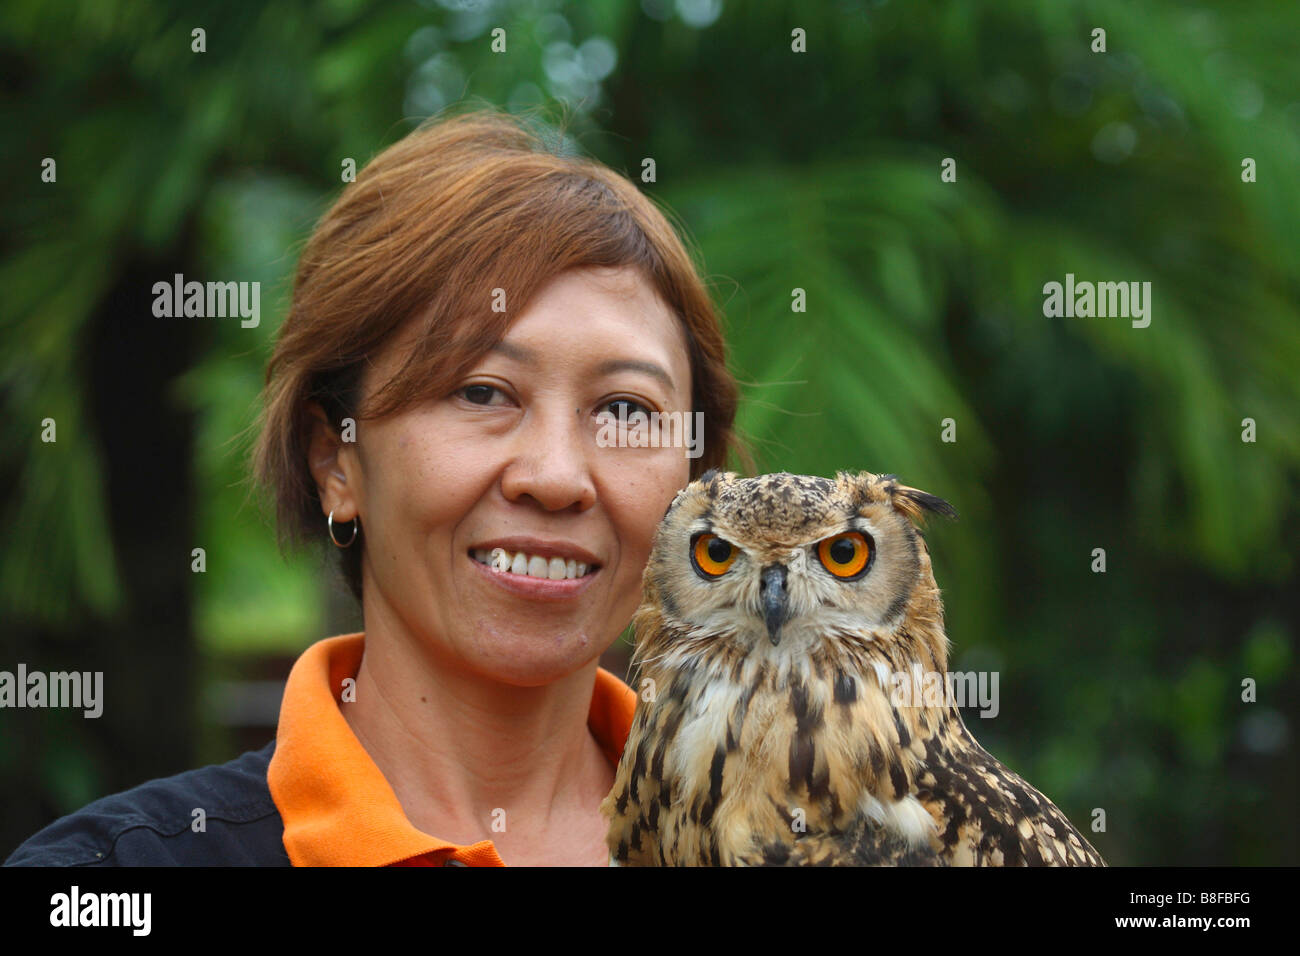 forest eagle owl (Bubo nipalensis), woman with forest eagle owl, Singapore, Jurong Bird Park Stock Photo